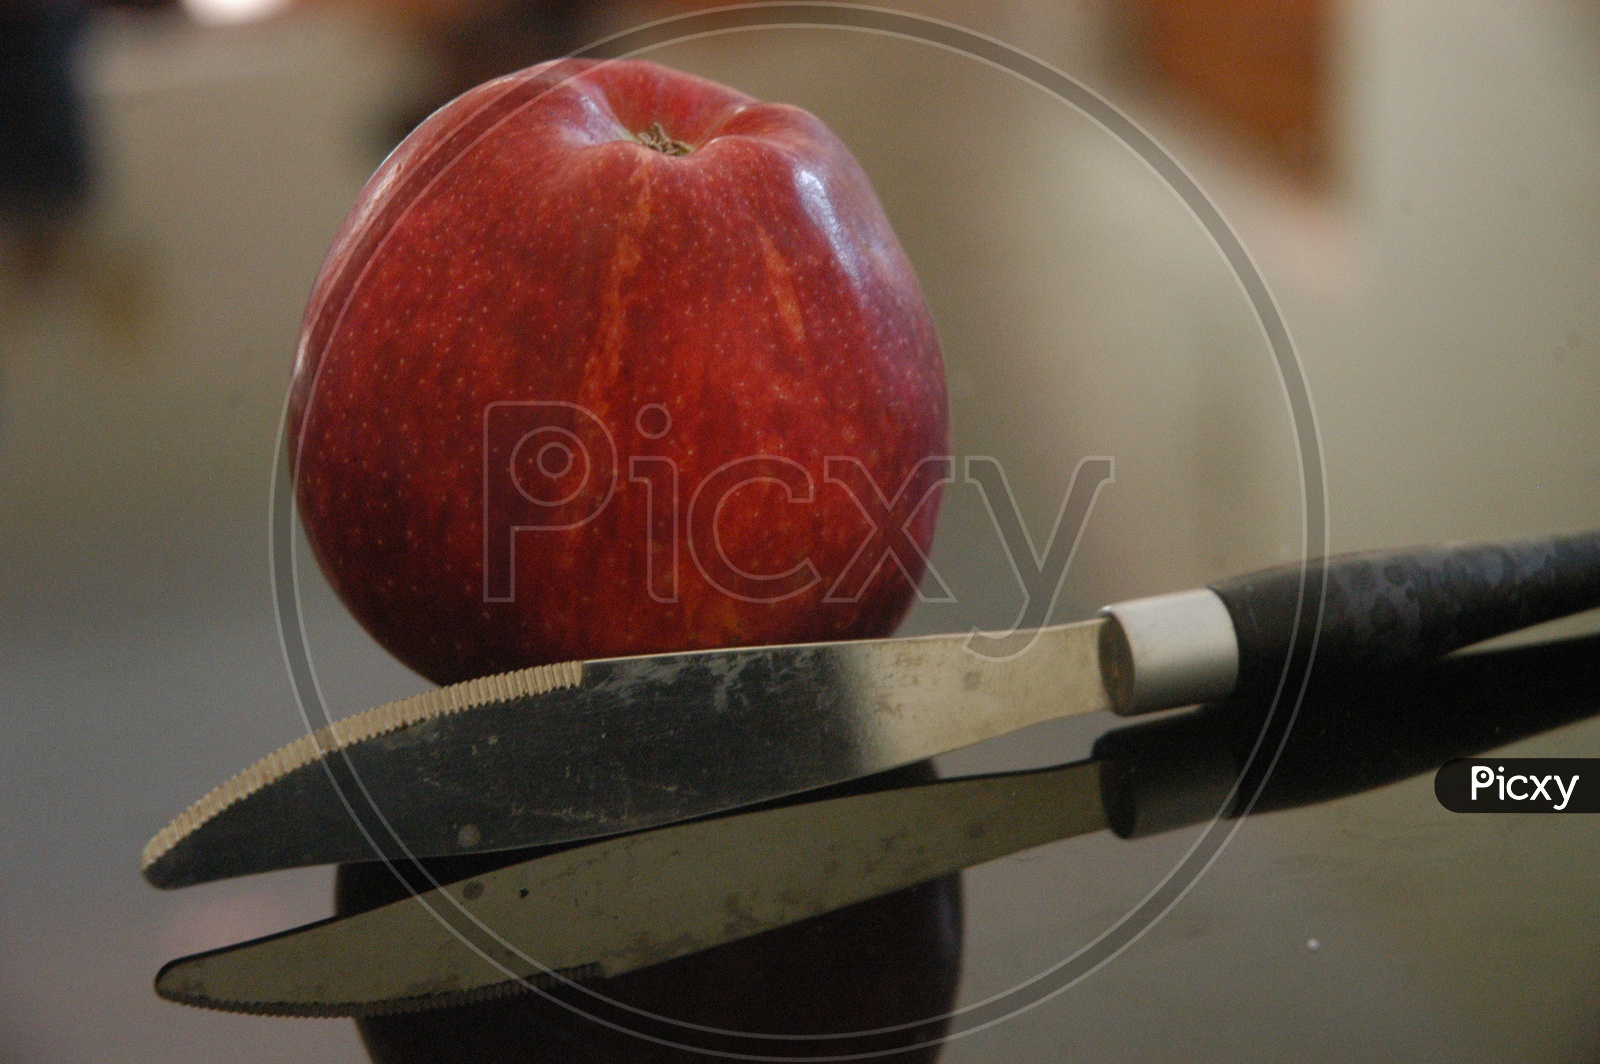 Close up shot of fresh red apple with knife